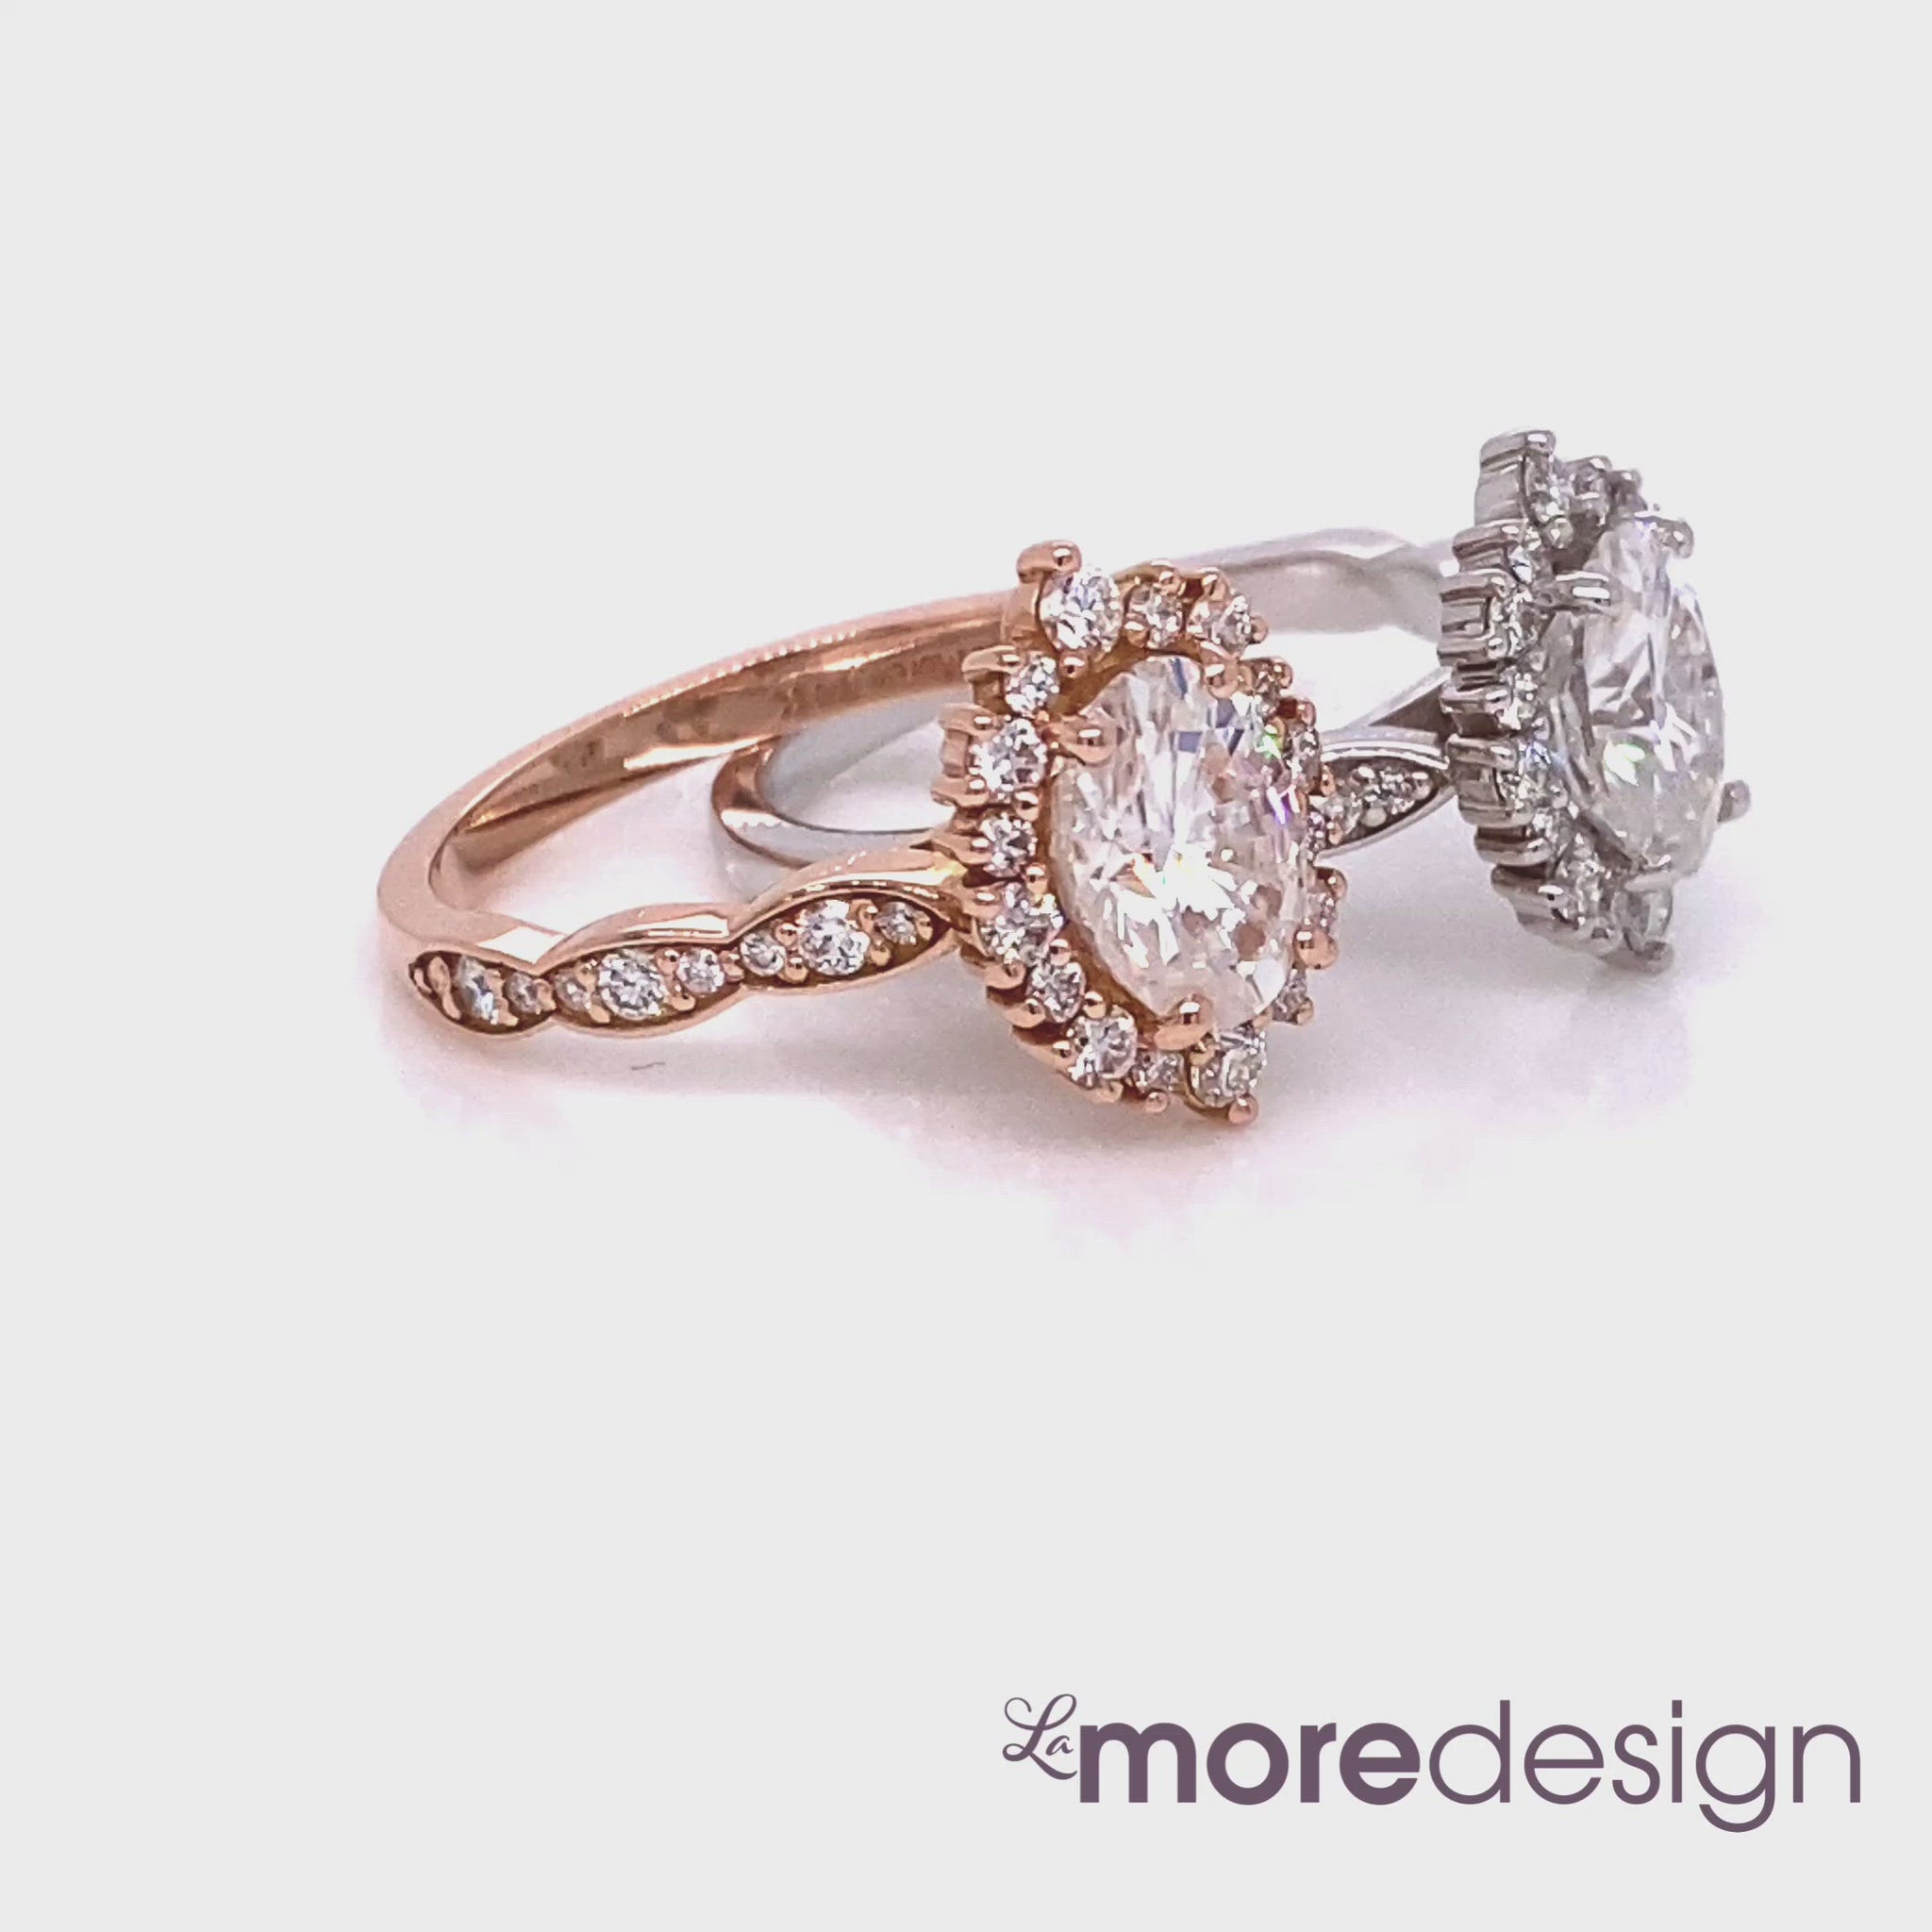 oval moissanite engagement ring white gold and rose gold in halo diamond cluster ring by la more design jewelry